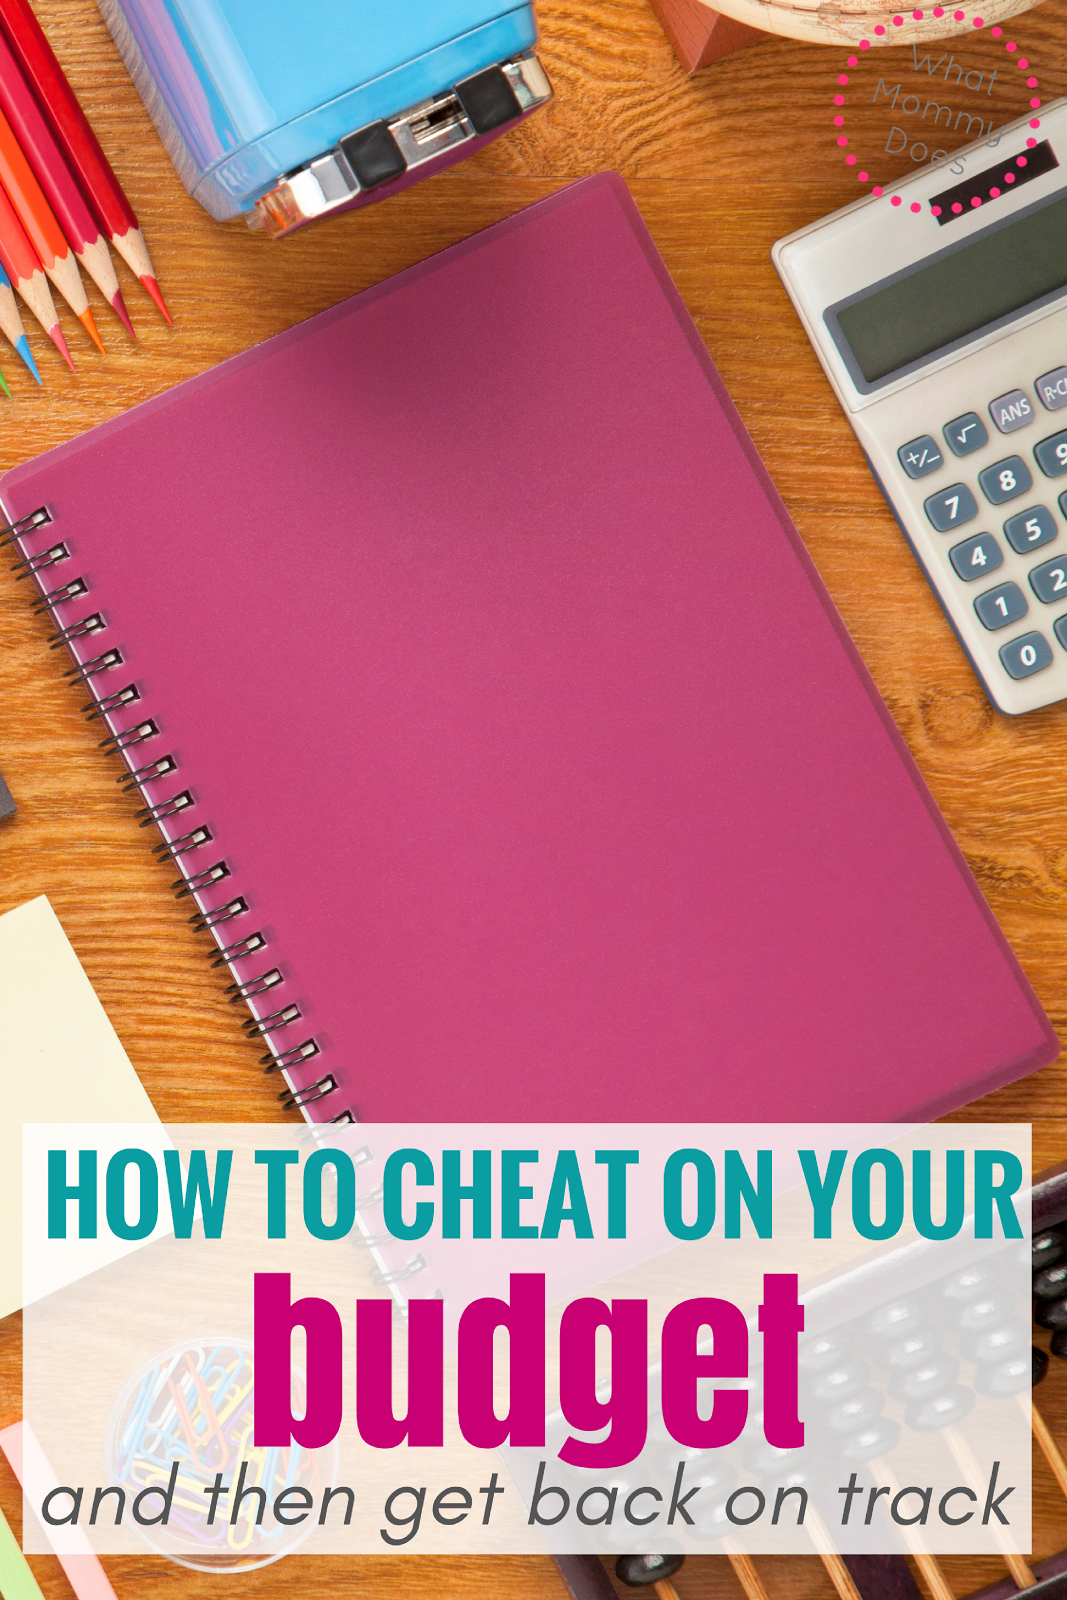 It's okay to cheat on your budget - as long as you know how to get back on track! Helpful tips here for budgeting, splurging, and not losing sight of the big picture.